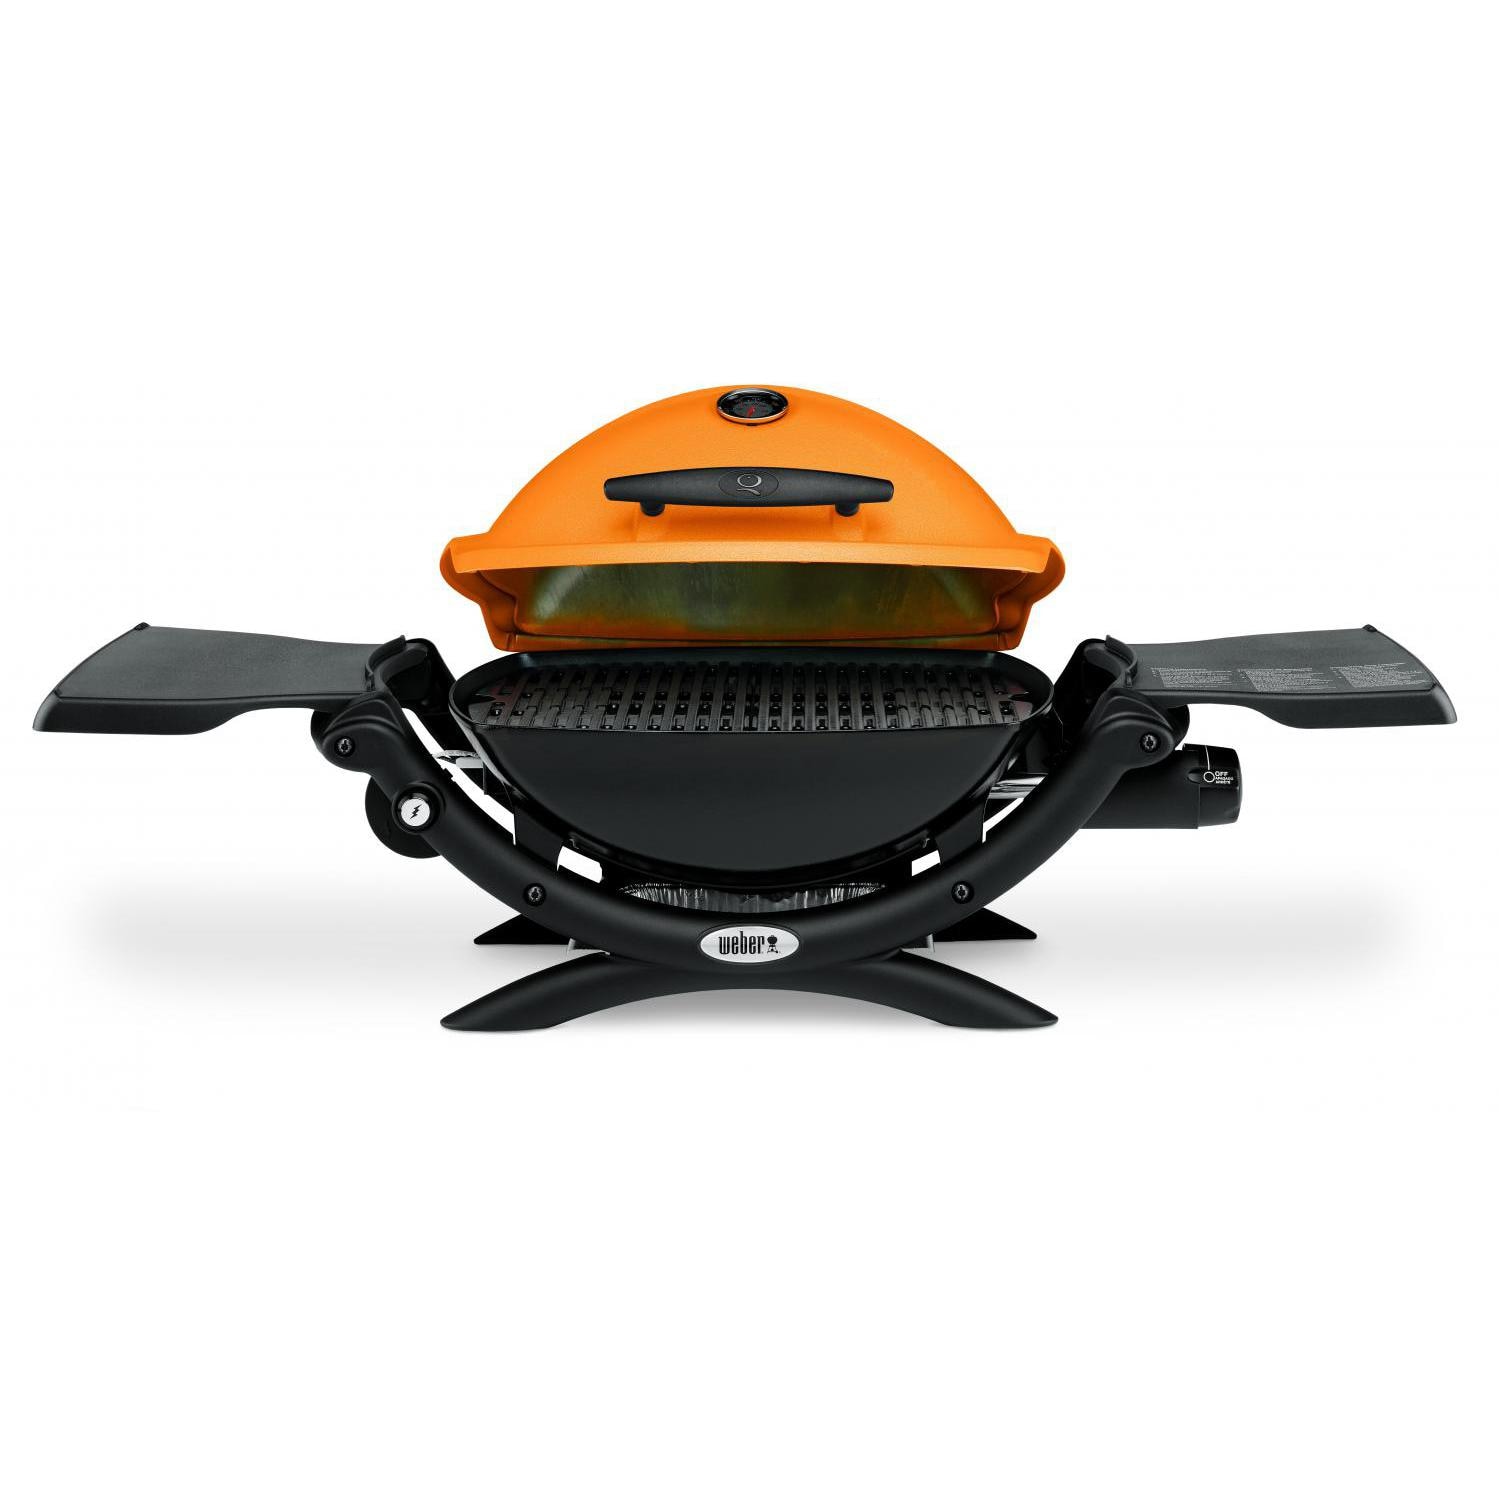 Weber Q 1200 Gas Grill - image 2 of 6